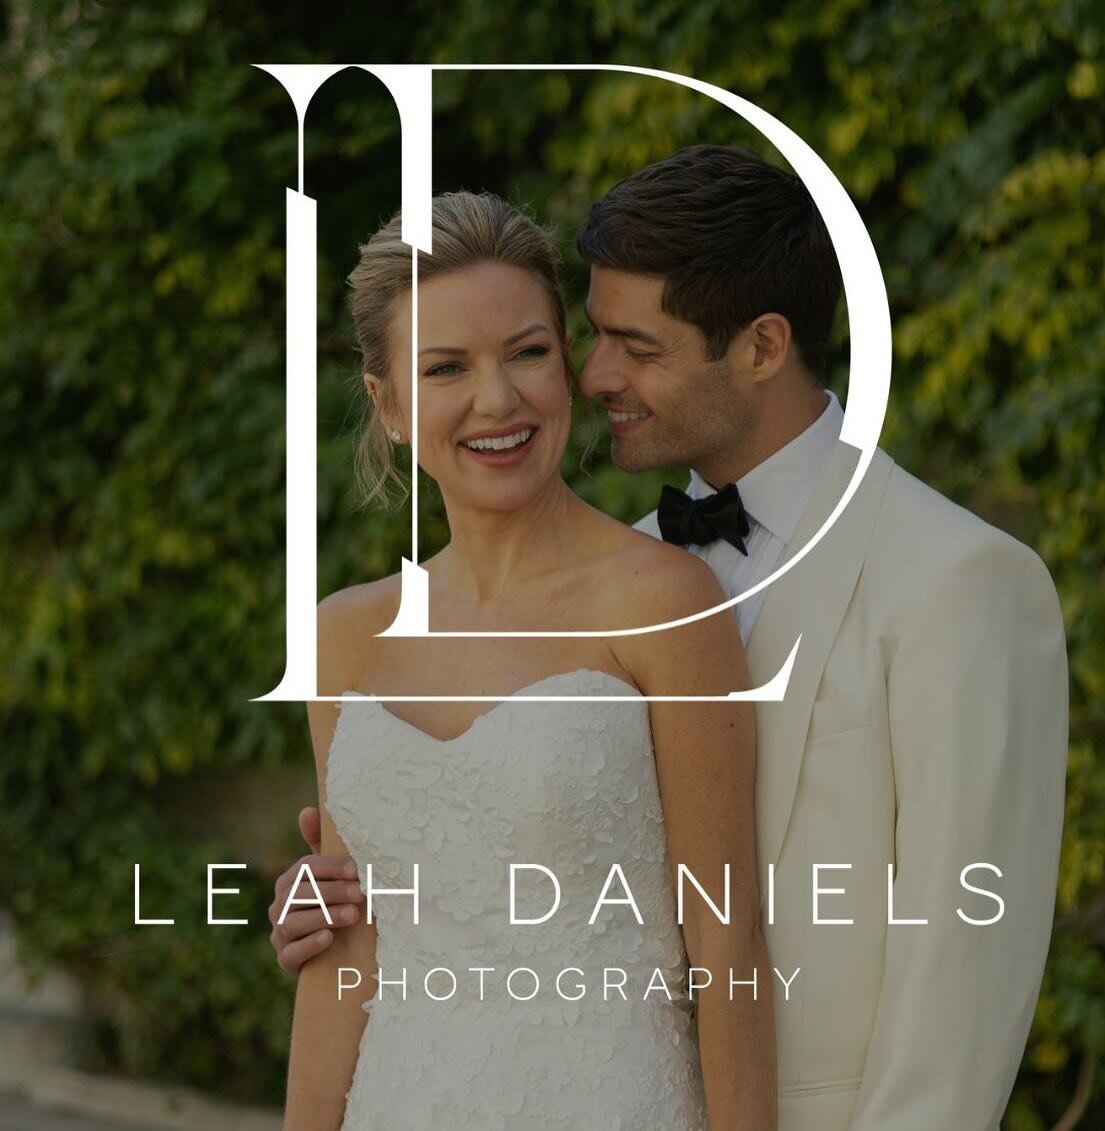 Welcome to the new Leah Daniels Photography experience! I&rsquo;m so excited to announce the new site launch and branding! I just want to say thank you to everyone who was involved in getting this site and rebrand up and running, you all are the real